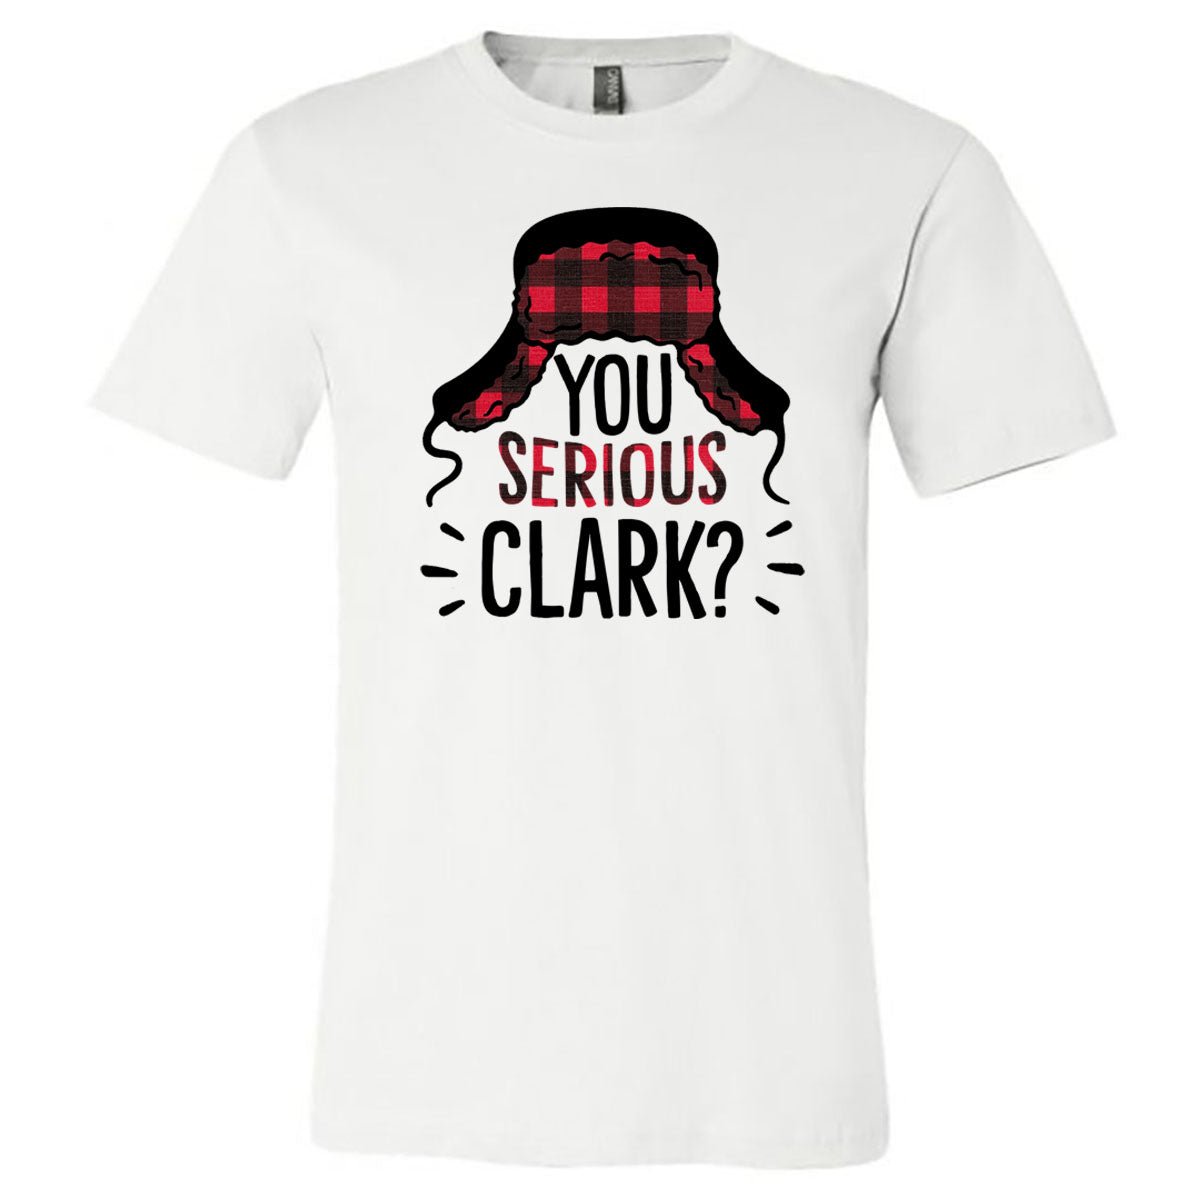 "You Serious Clark?" Tee - Southern Grace Creations